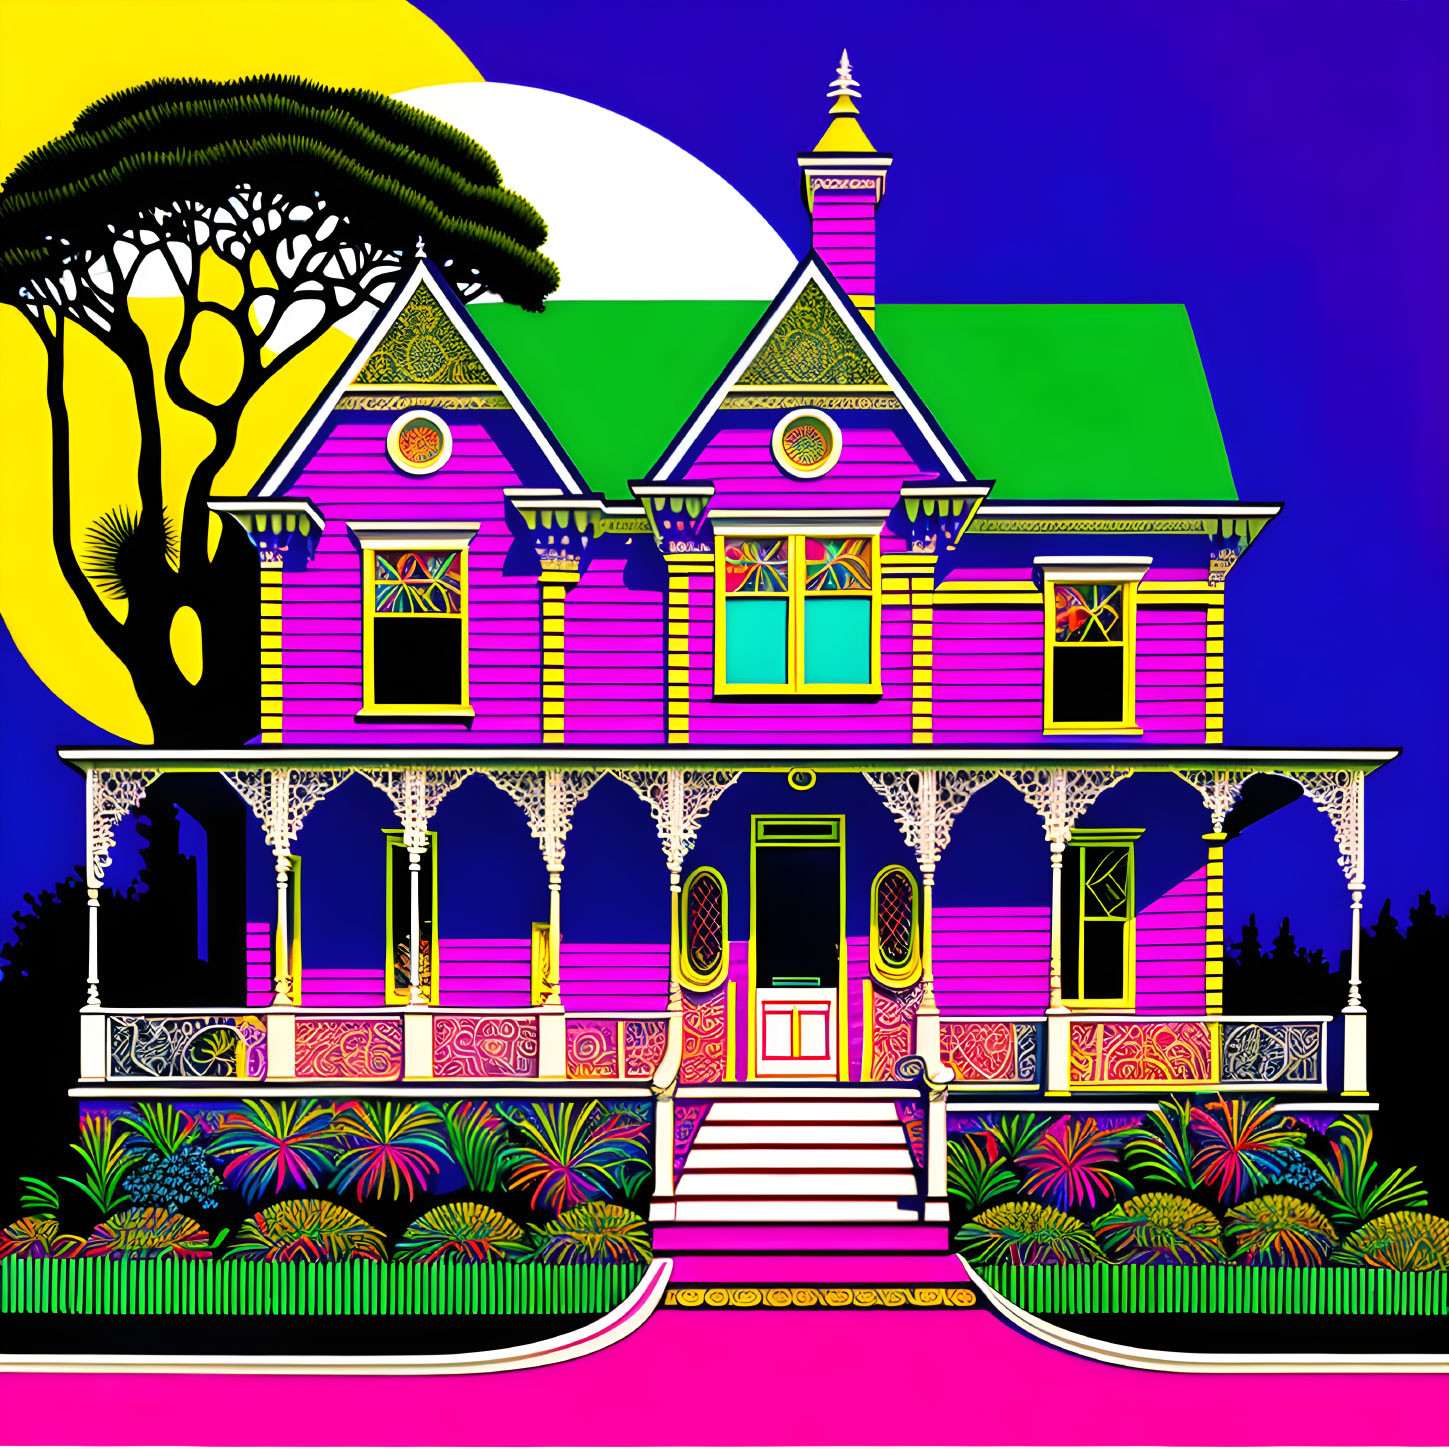 Victorian house with pink walls and green roof under purple sky